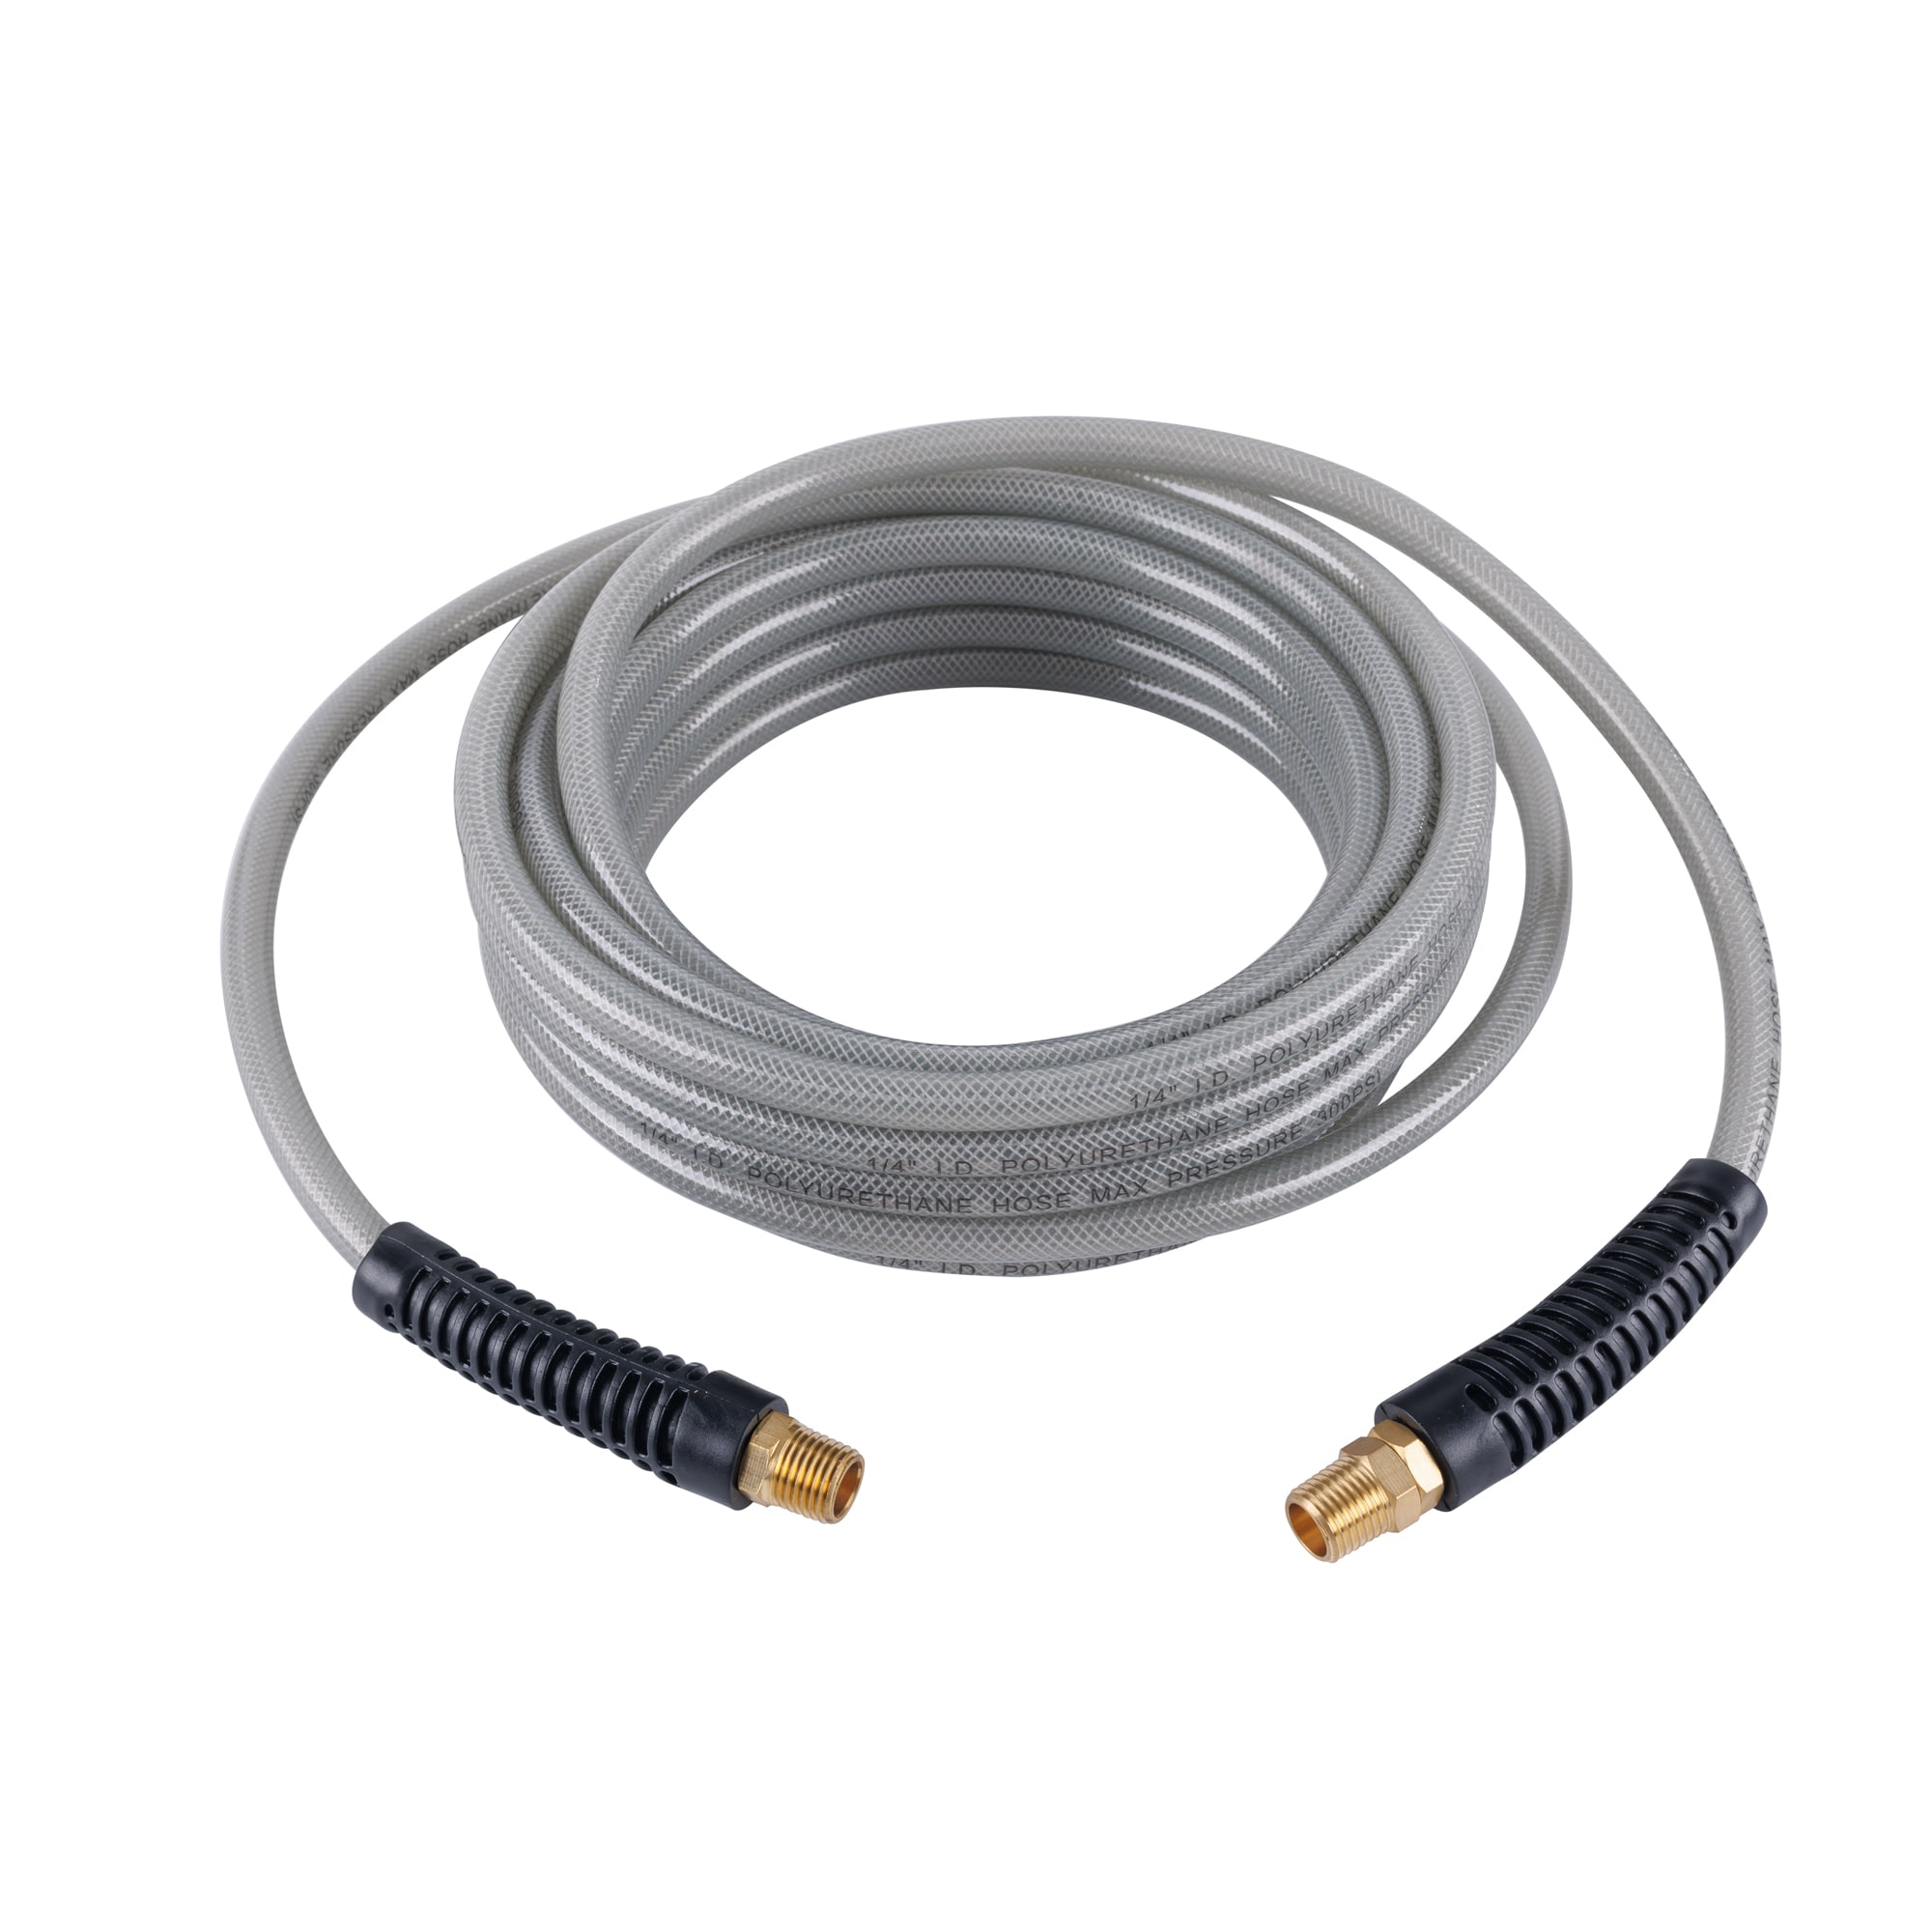 Flexzilla Pro Air Hose, 1/4-in x 25-ft, 1/4-in Mnpt Fittings in the Air  Compressor Hoses department at